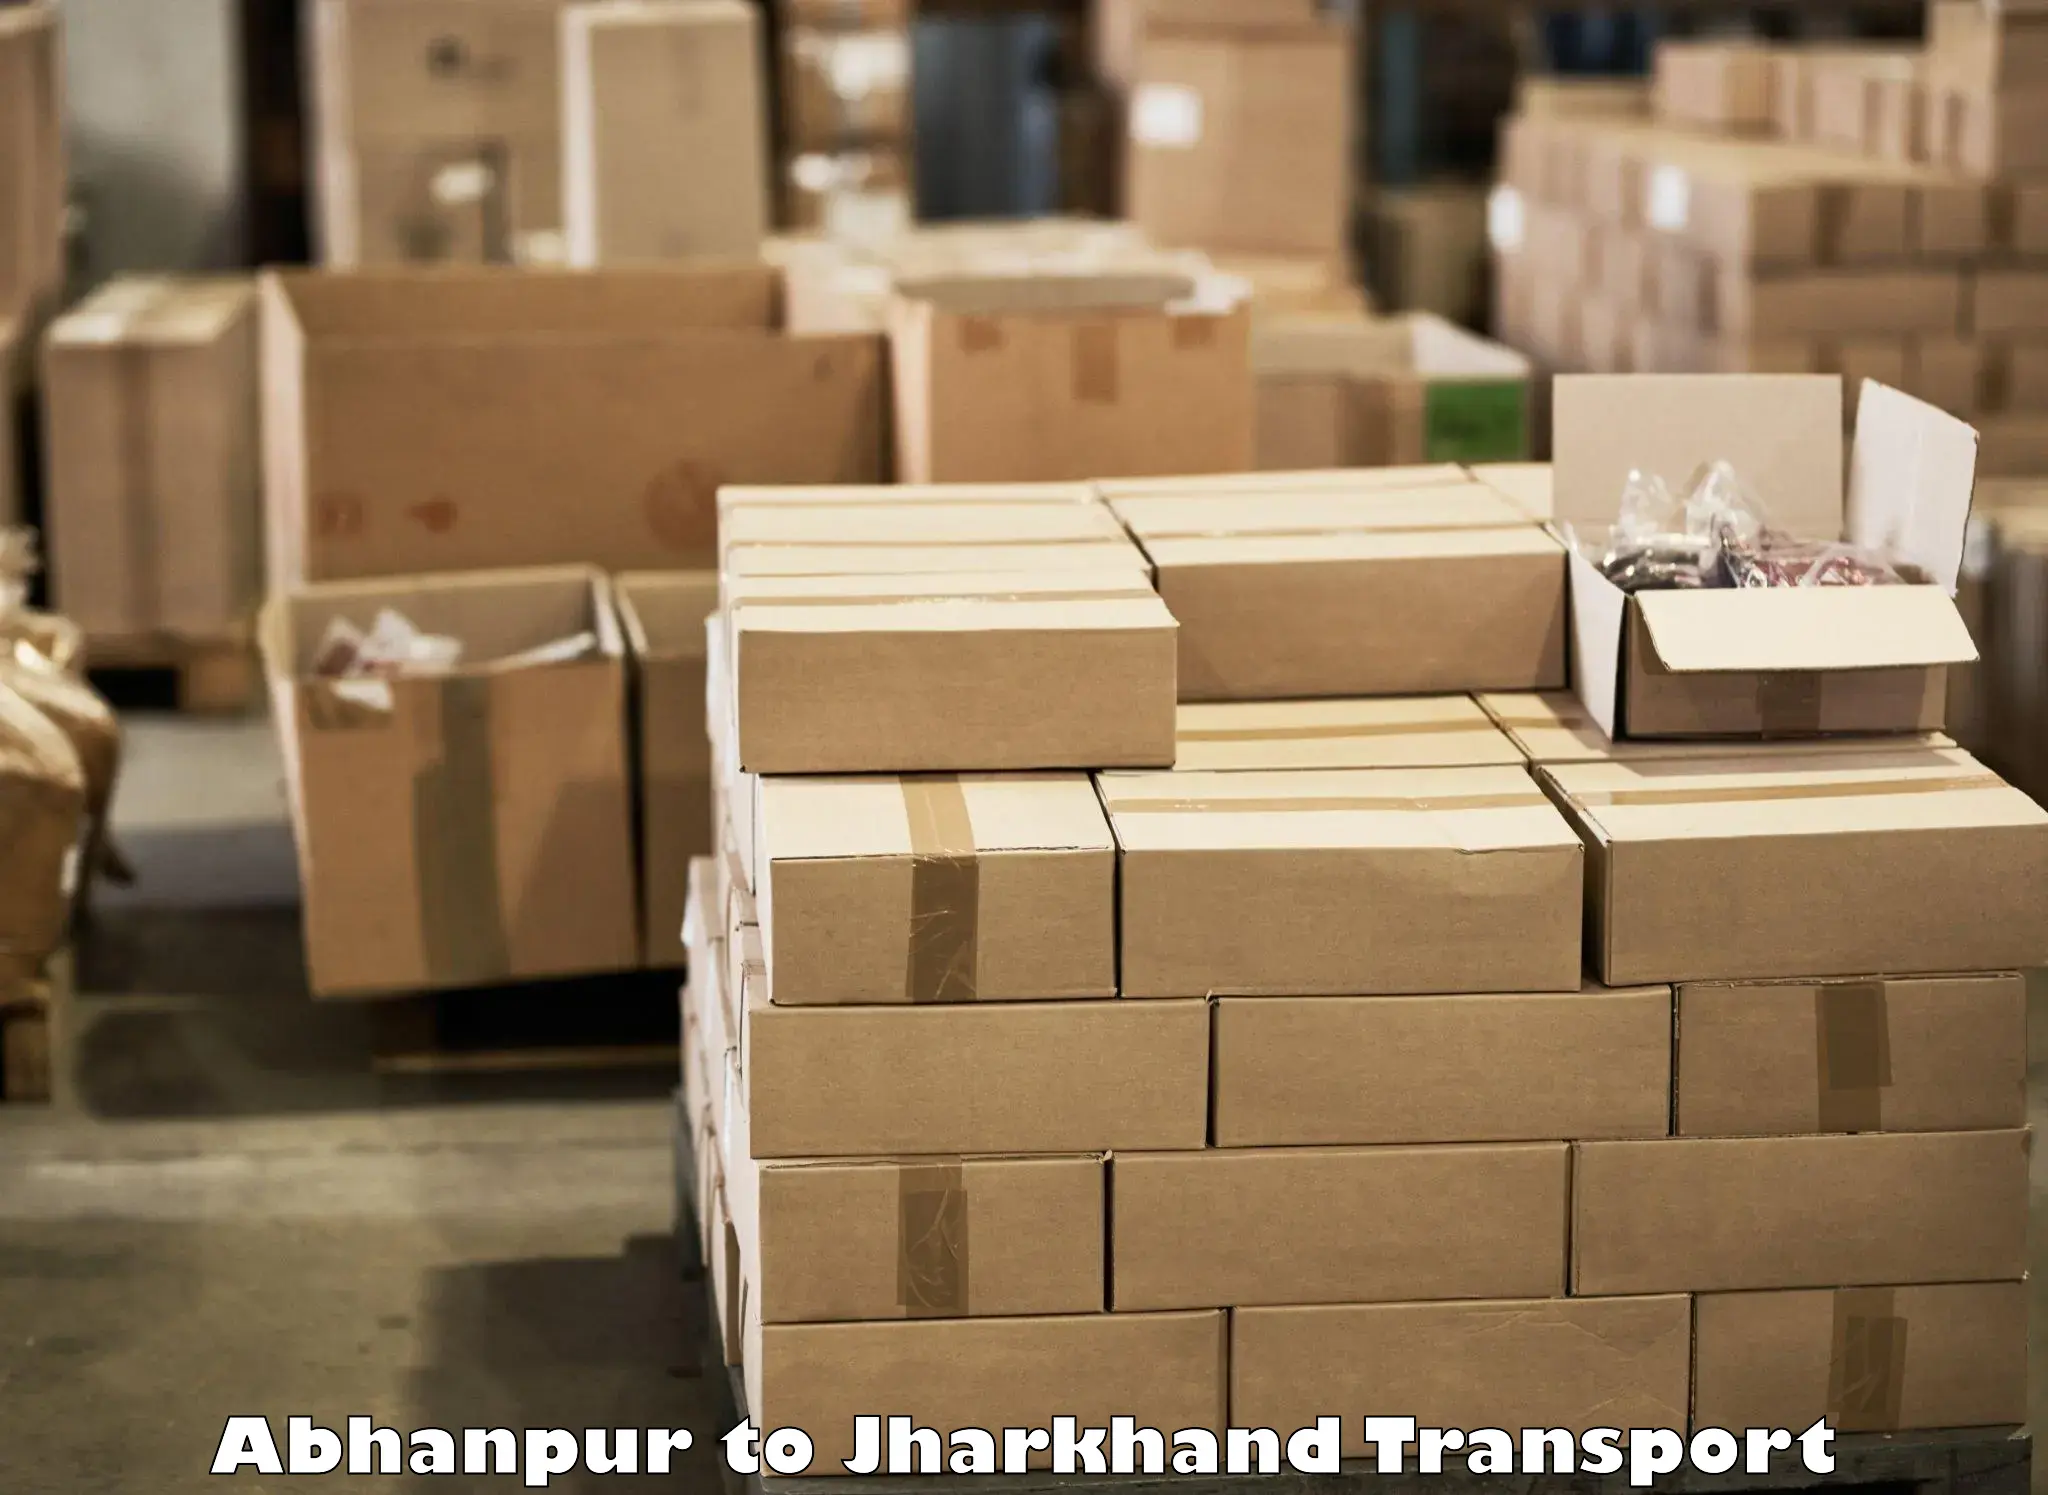 Commercial transport service Abhanpur to IIT Dhanbad